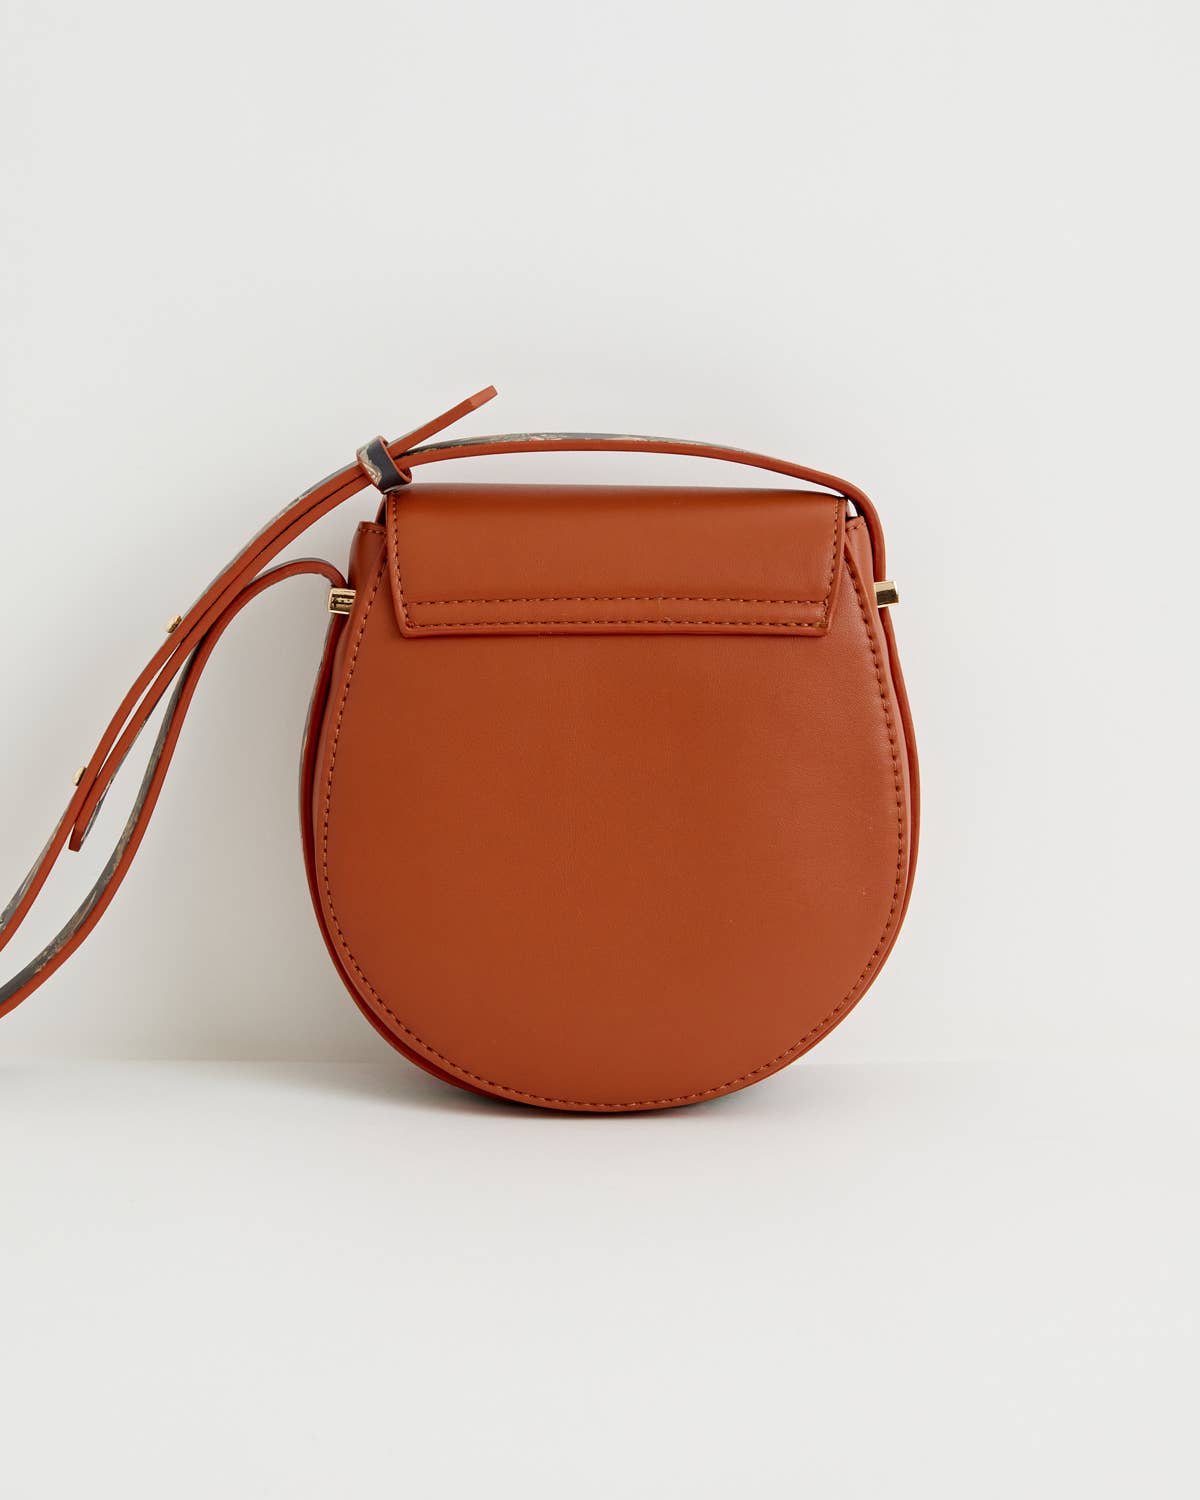 A Night's Tale Saddle Bag Tan - Out of the Blue